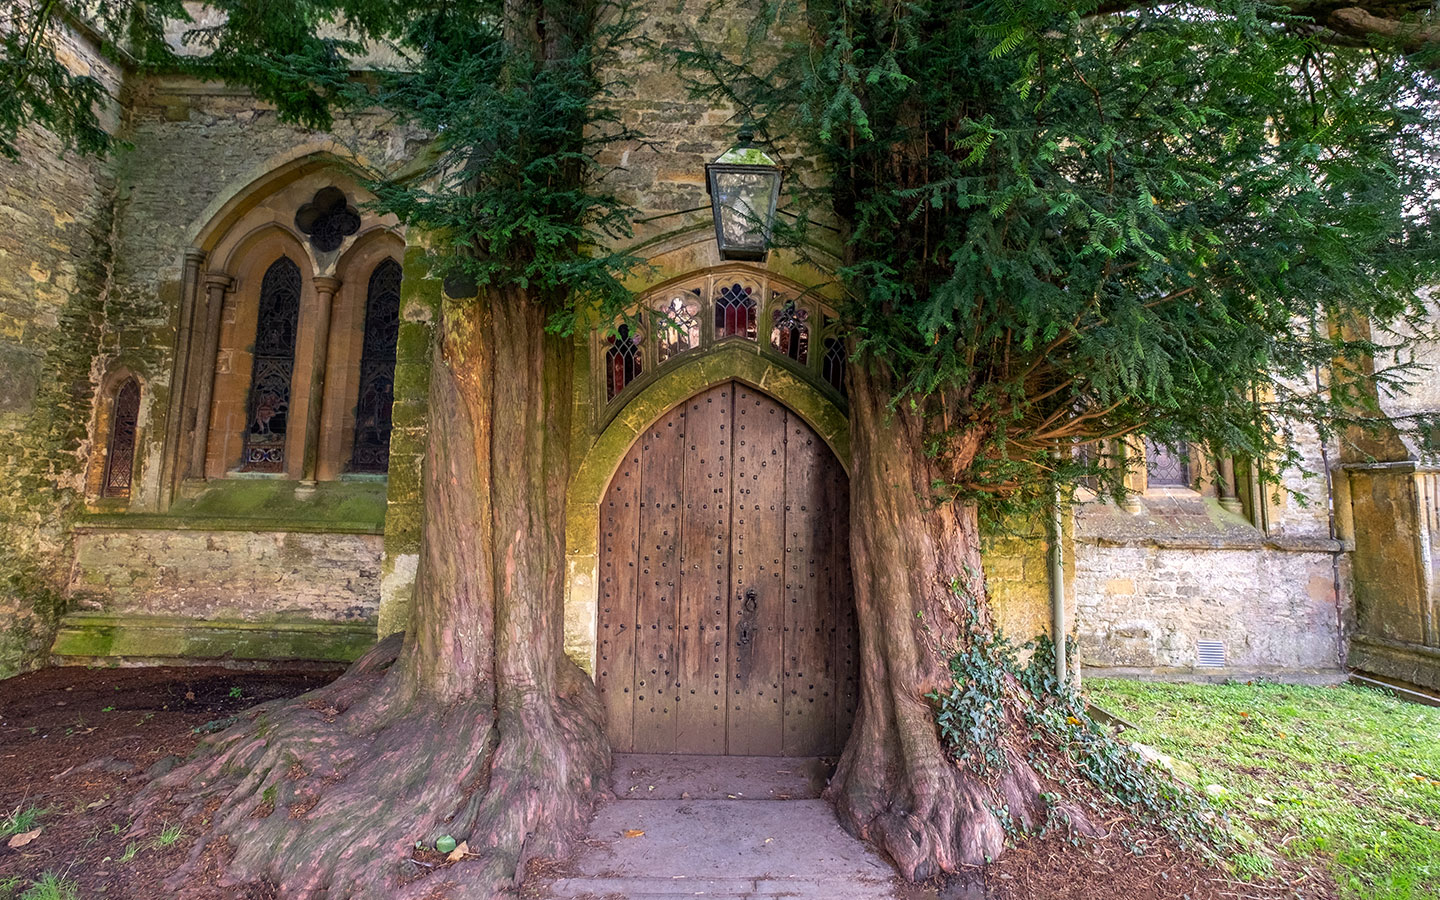 The Yew Tree Door at St Edward’s Church in Stow-on-the-Wold in the Cotswolds